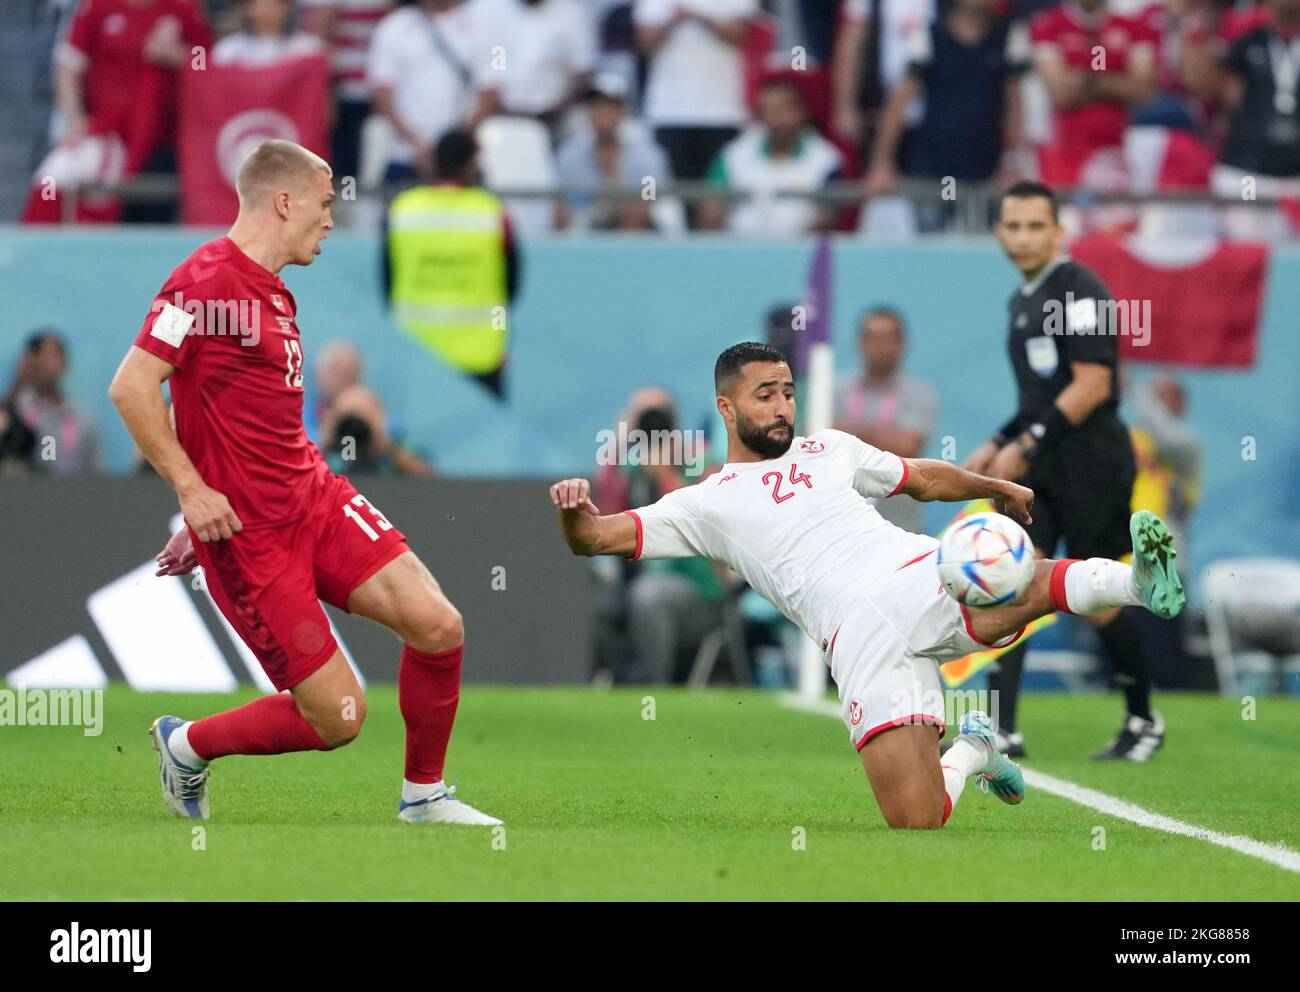 Al Rayyan, Qatar. 22nd Nov, 2022. Ali Abdi (R) of Tunisia competes against Rasmus Kristensen of Denmark during the Group D match between Denmark and Tunisia at the 2022 FIFA World Cup at Education City Stadium in Al Rayyan, Qatar, Nov. 22, 2022. Credit: Zheng Huansong/Xinhua/Alamy Live News Stock Photo